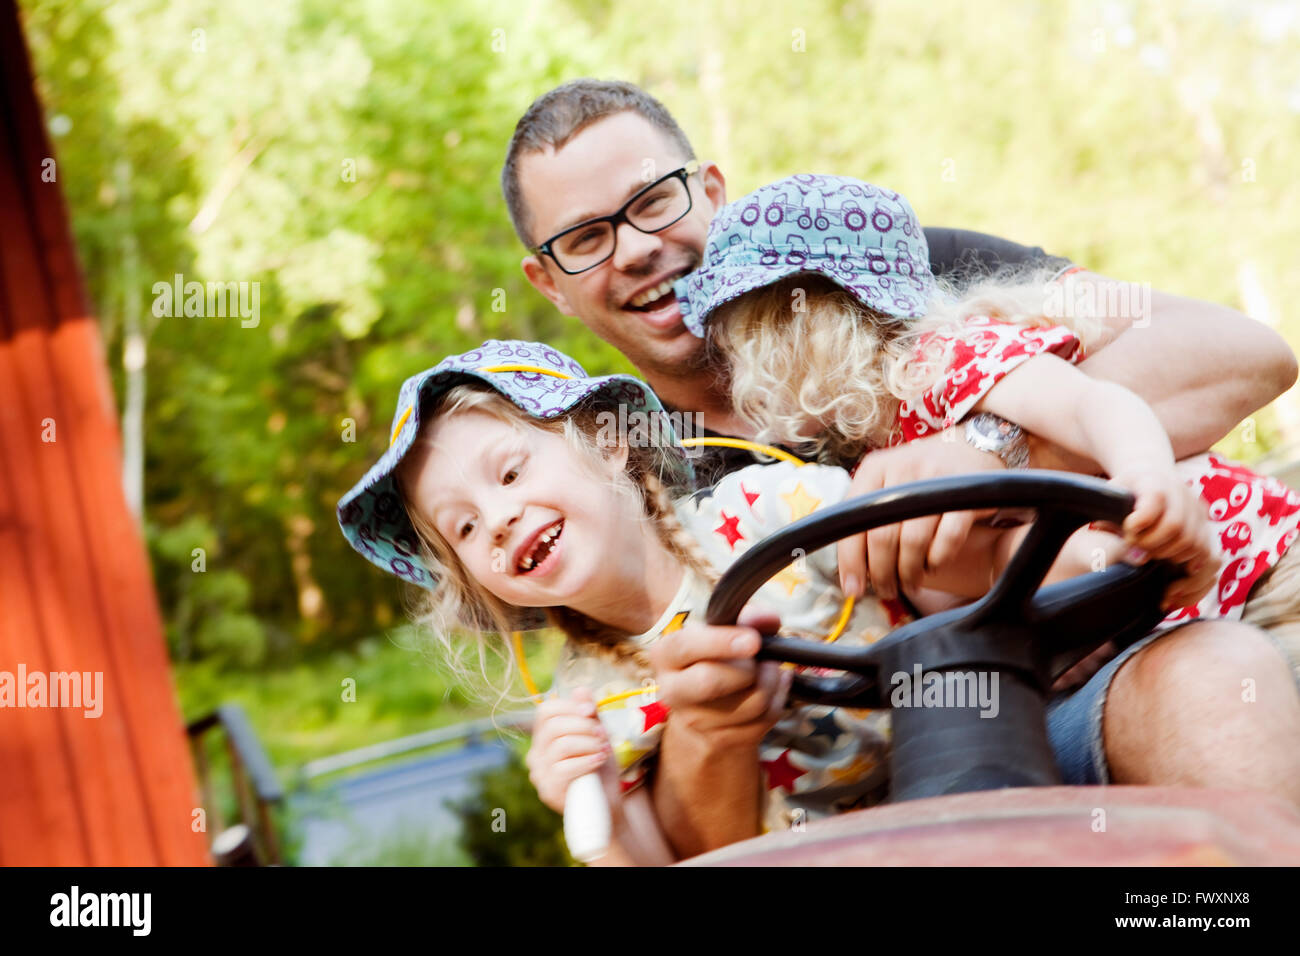 Sweden, Vastra Gotaland, Olofstorp, Father with daughters (4-5, 8-9) driving tractor Stock Photo